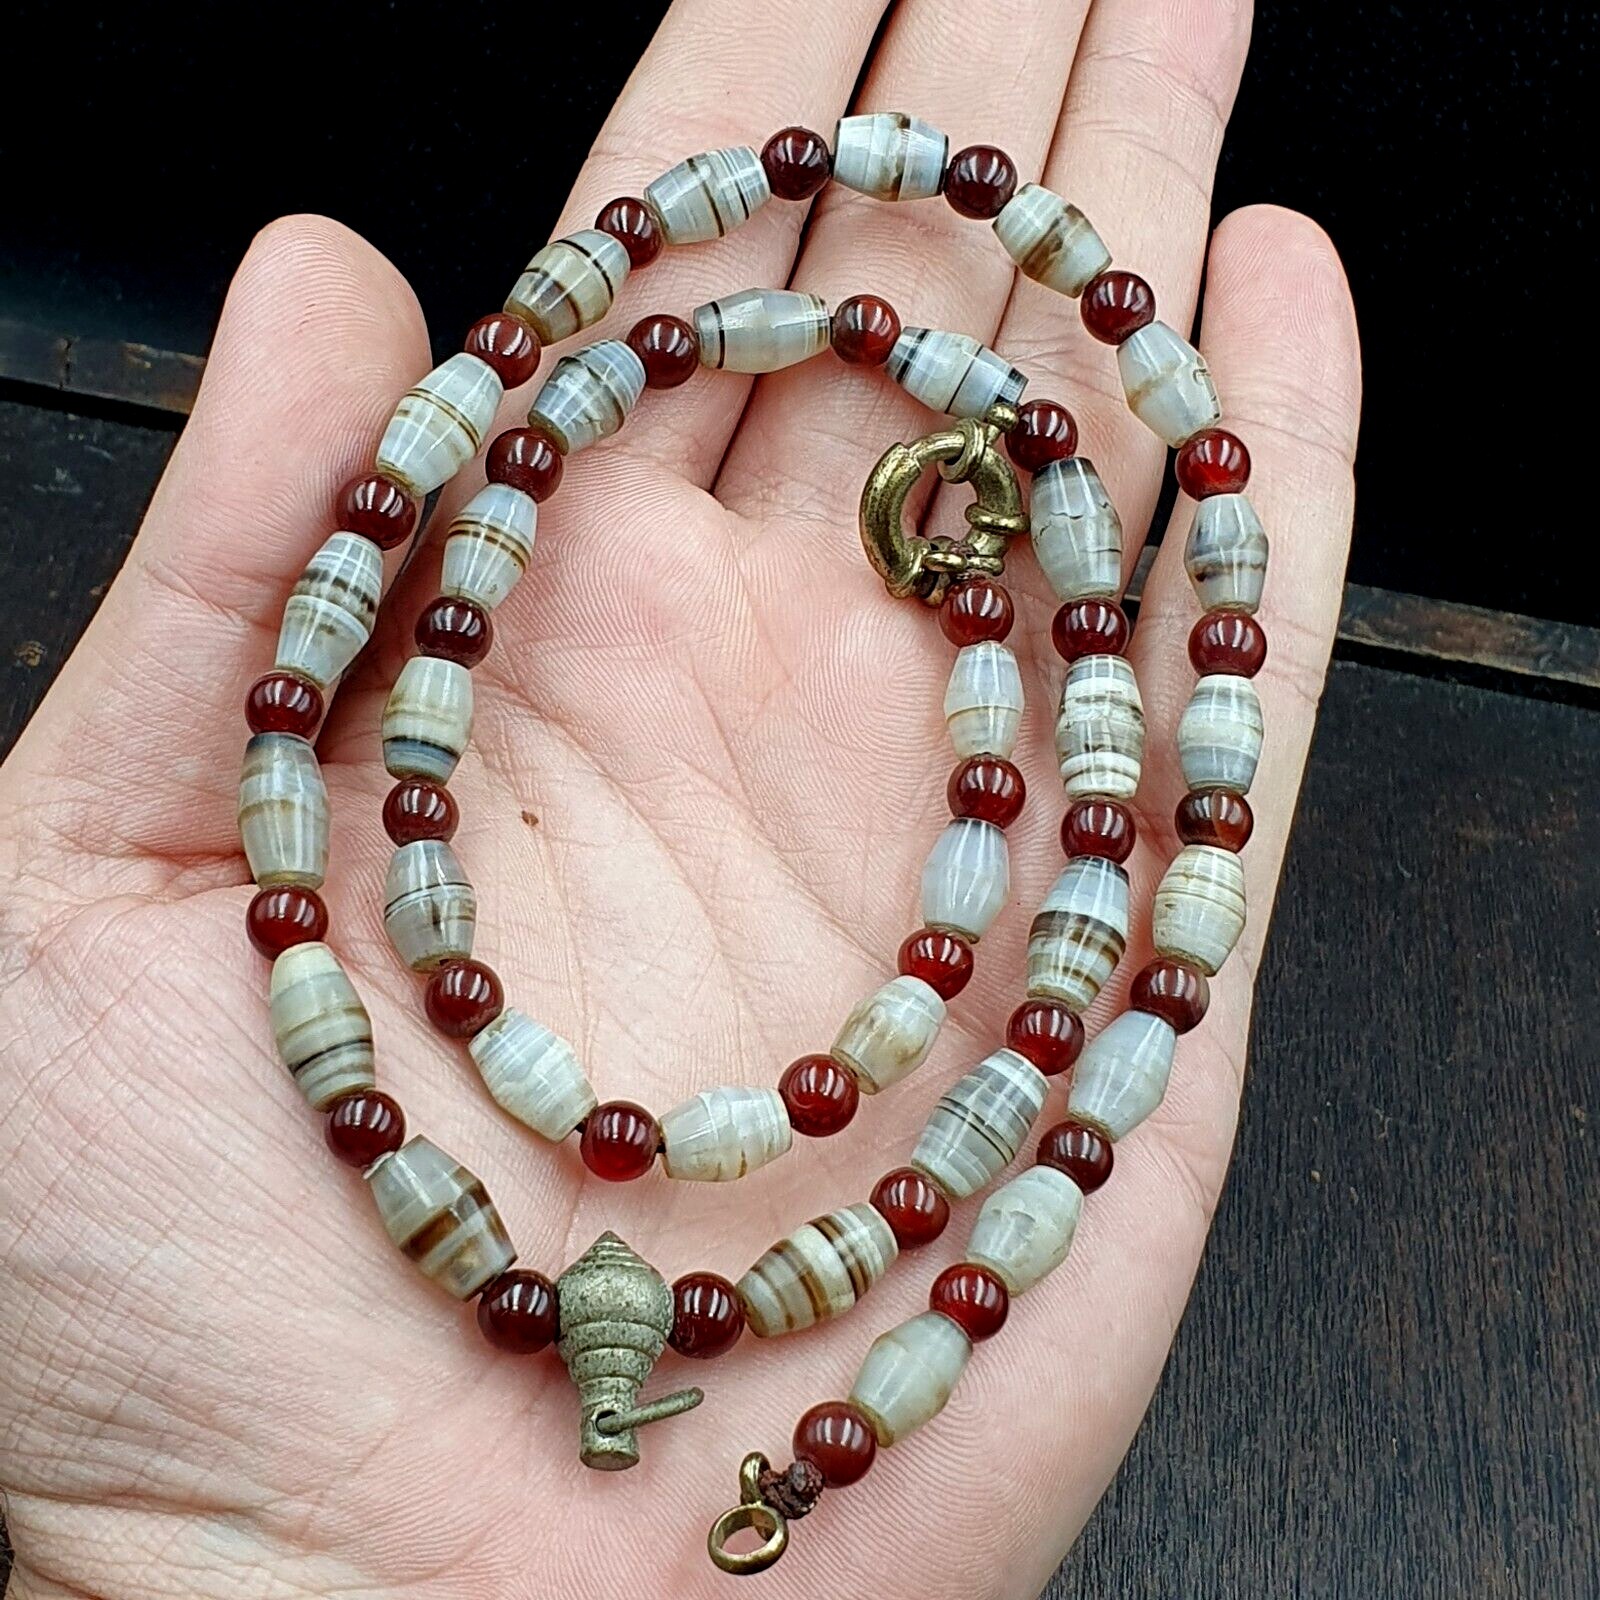 AA Antique Bactrian White Stripes Agate Middle Eastern Agate Beads necklace